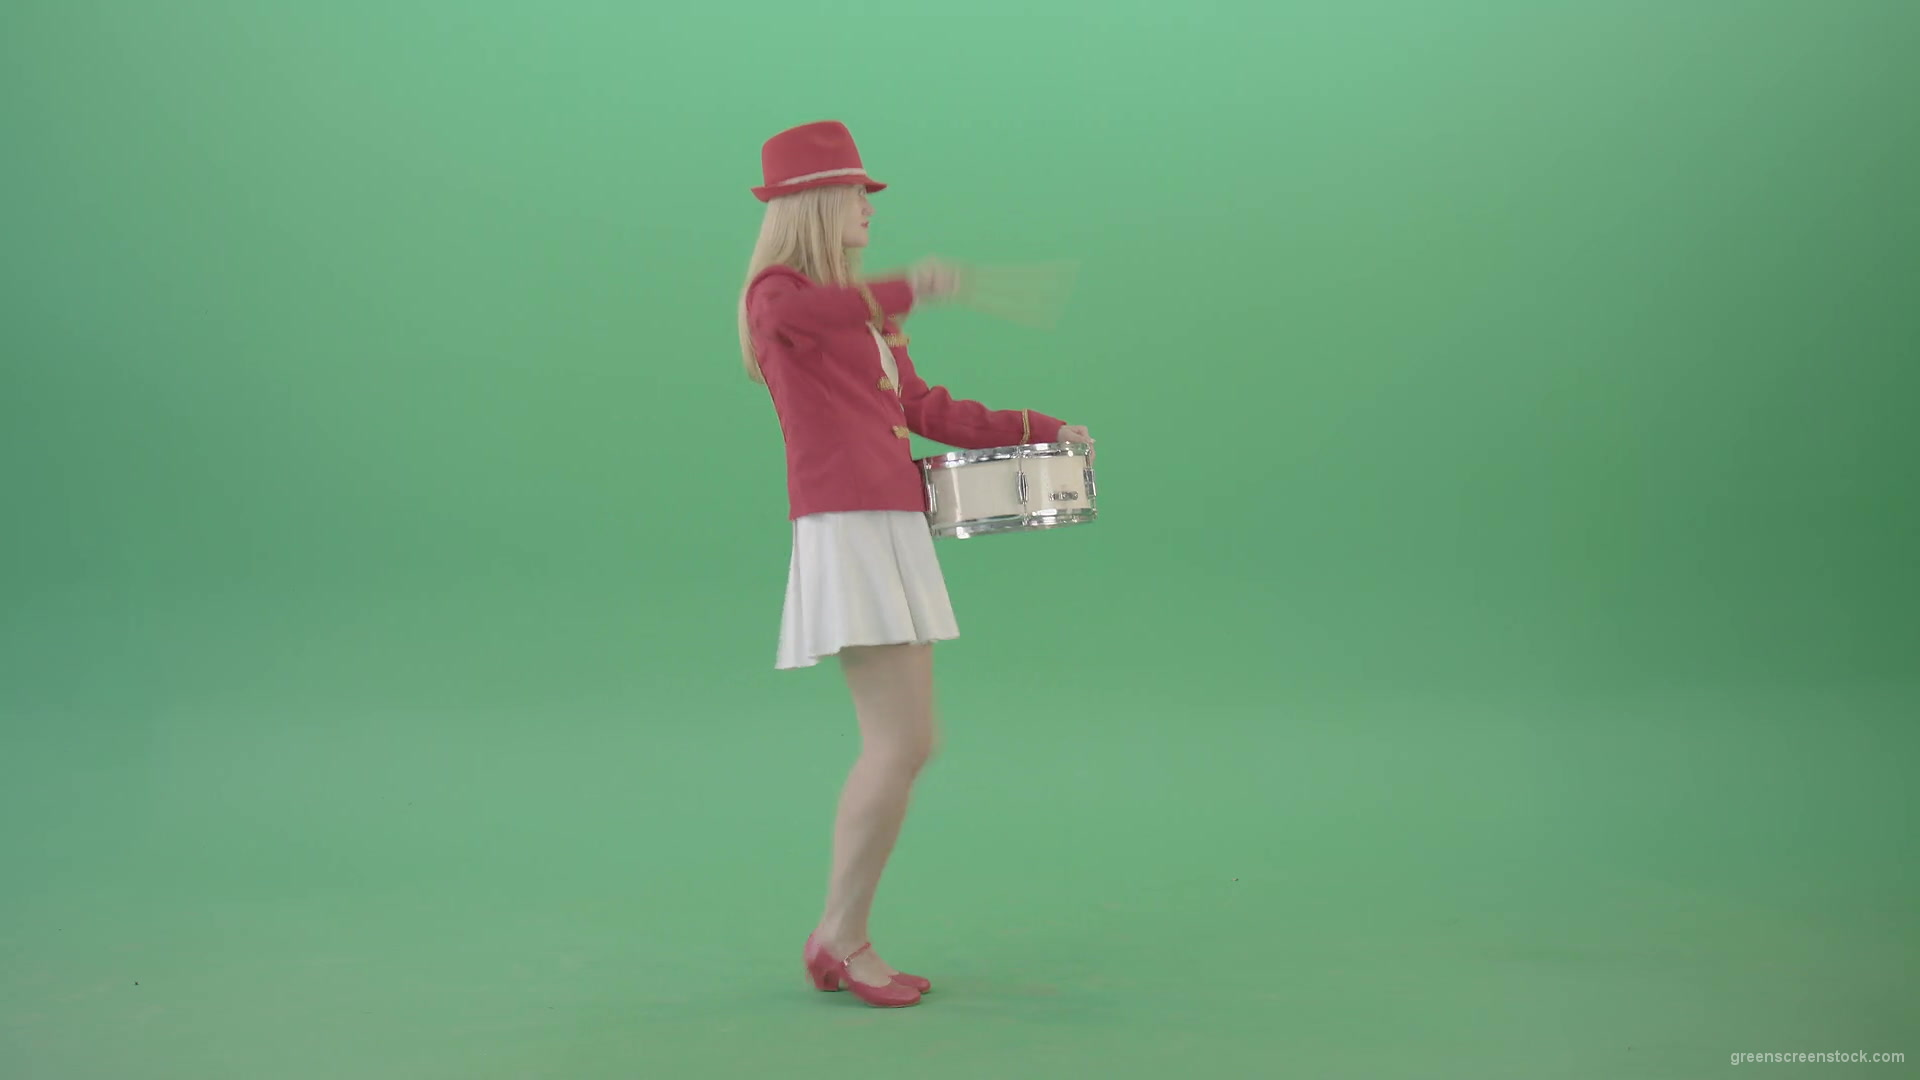 Side-view-marching-girl-play-white-snare-drum-in-red-uniform-on-green-screen-Video-Footage-1920_005 Green Screen Stock